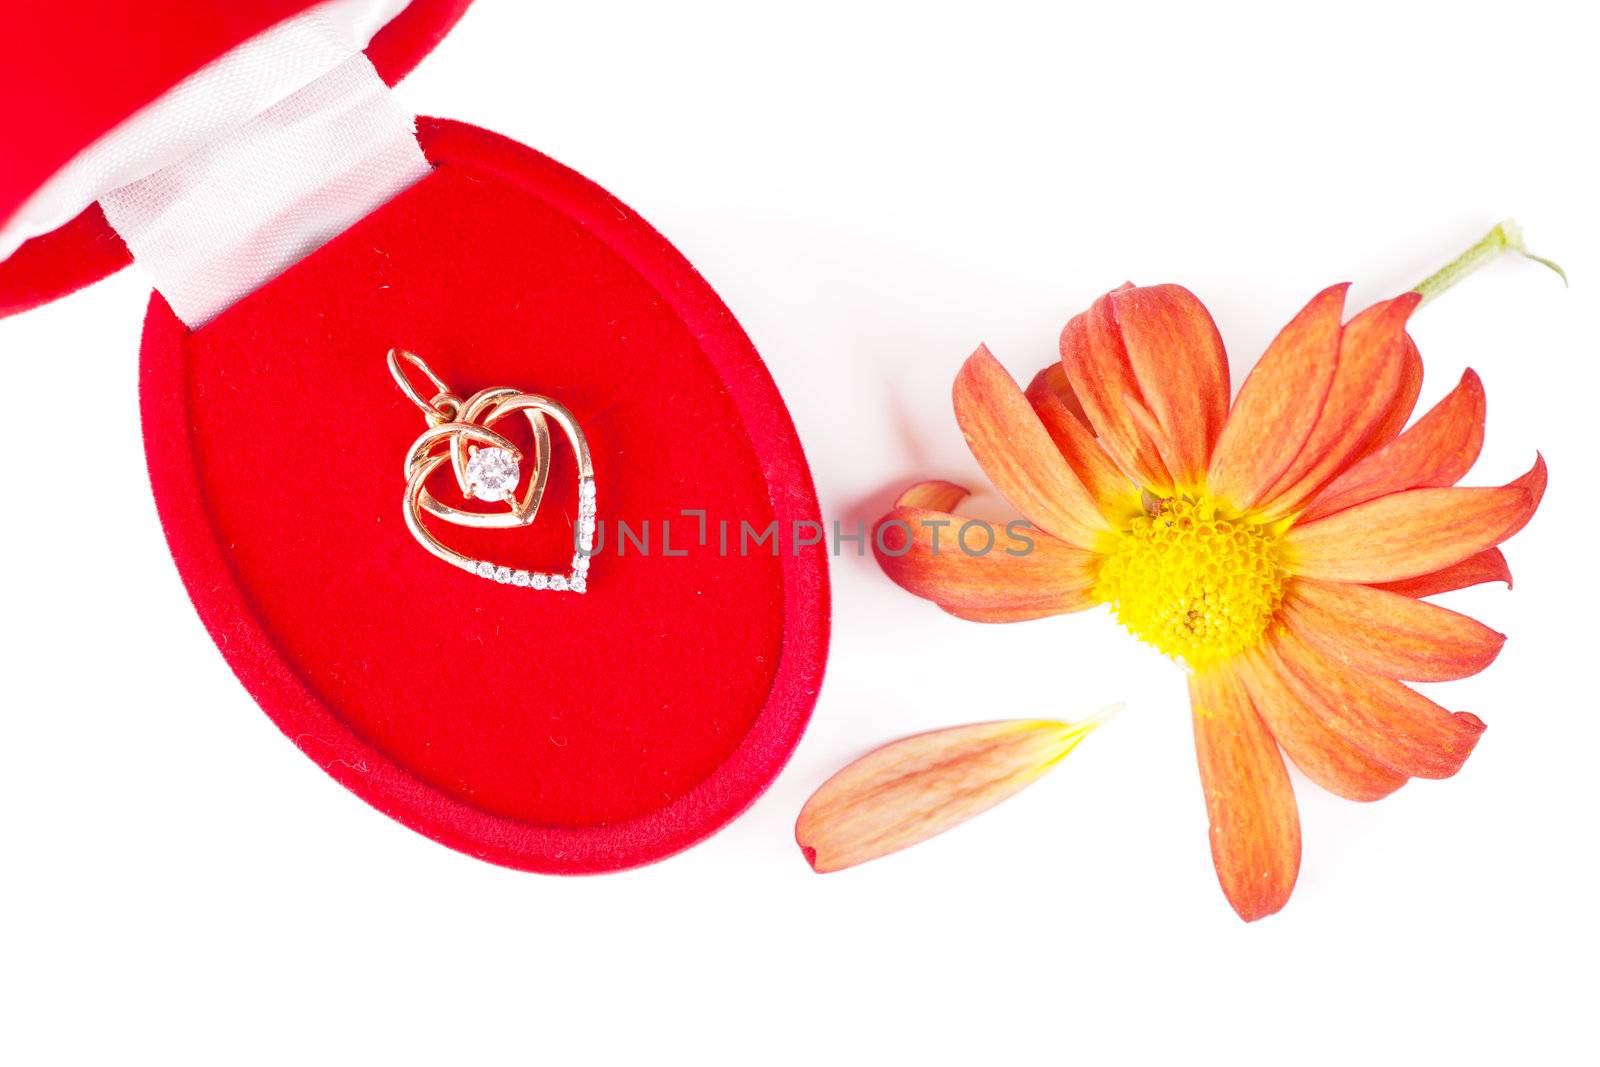 Golden pendant in a red box and chrysanthemum without one petal